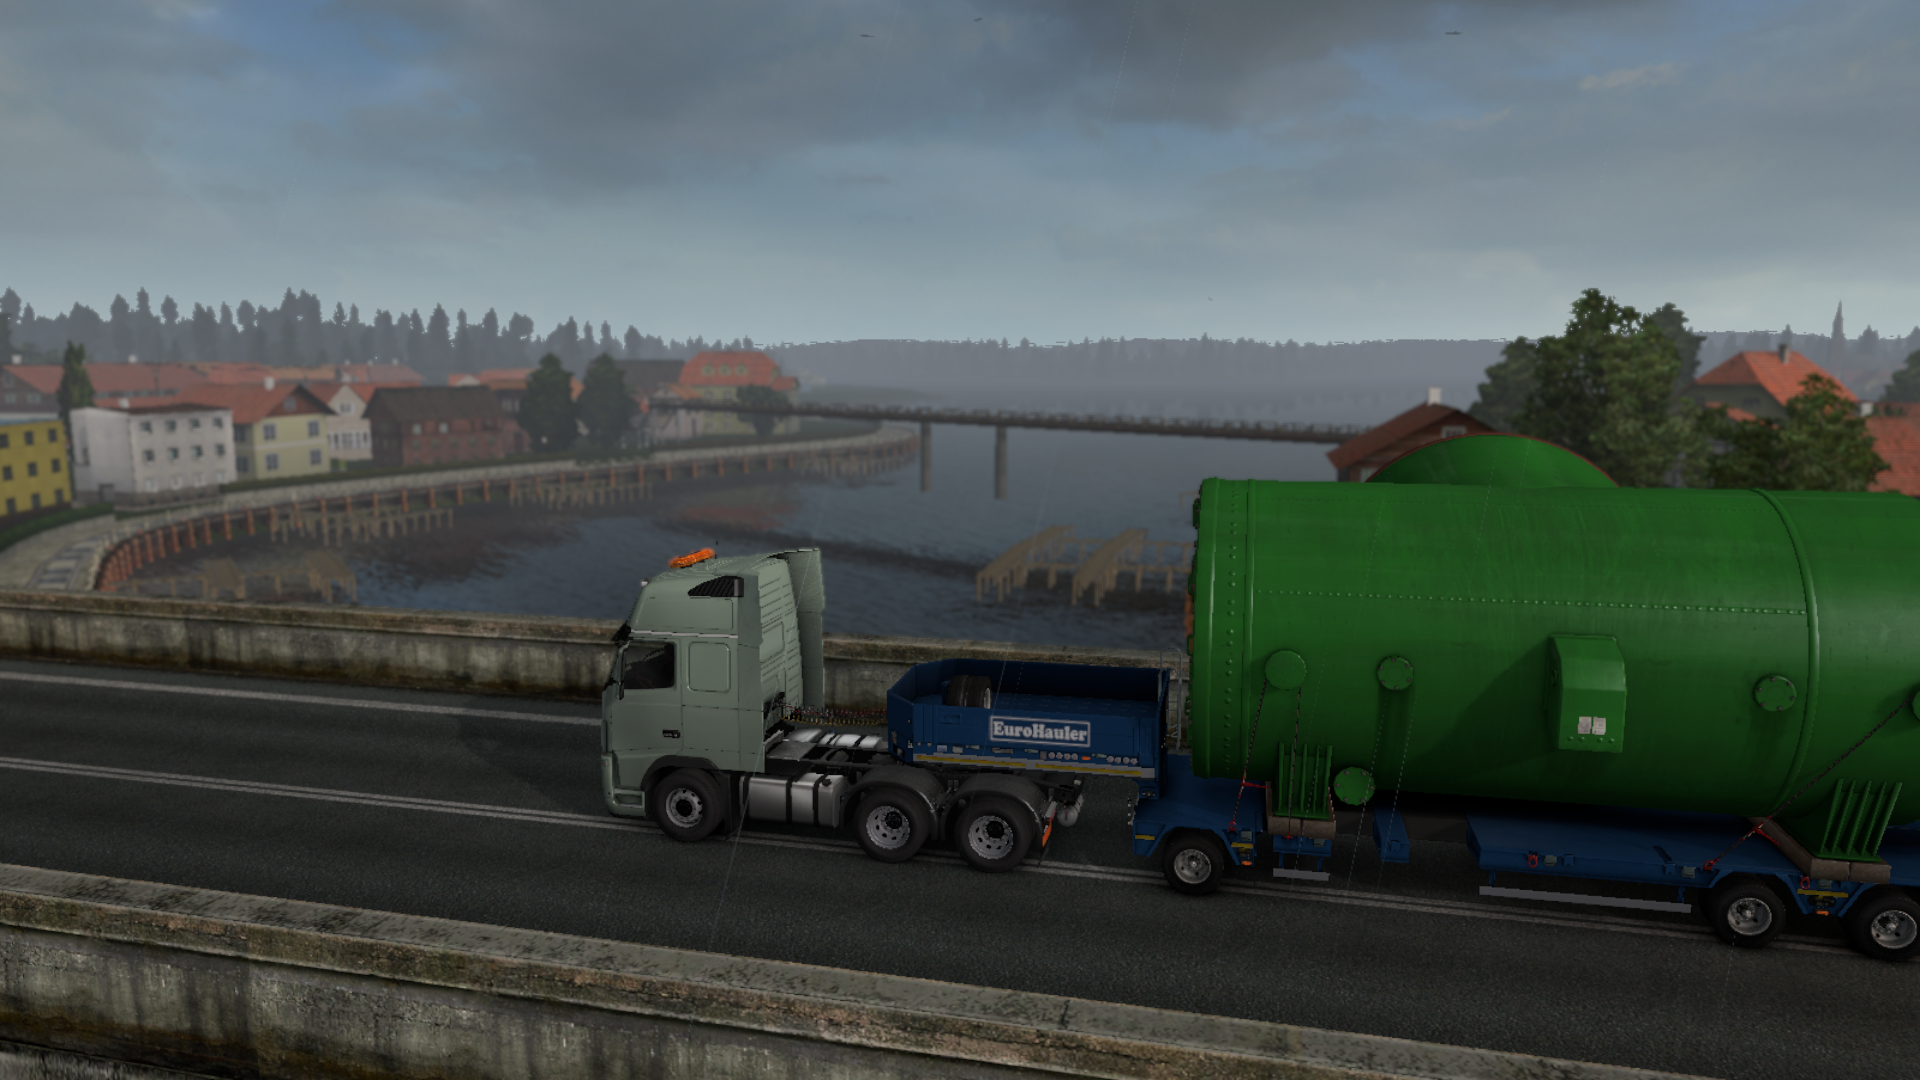 ets2_20200409_190928_00.png